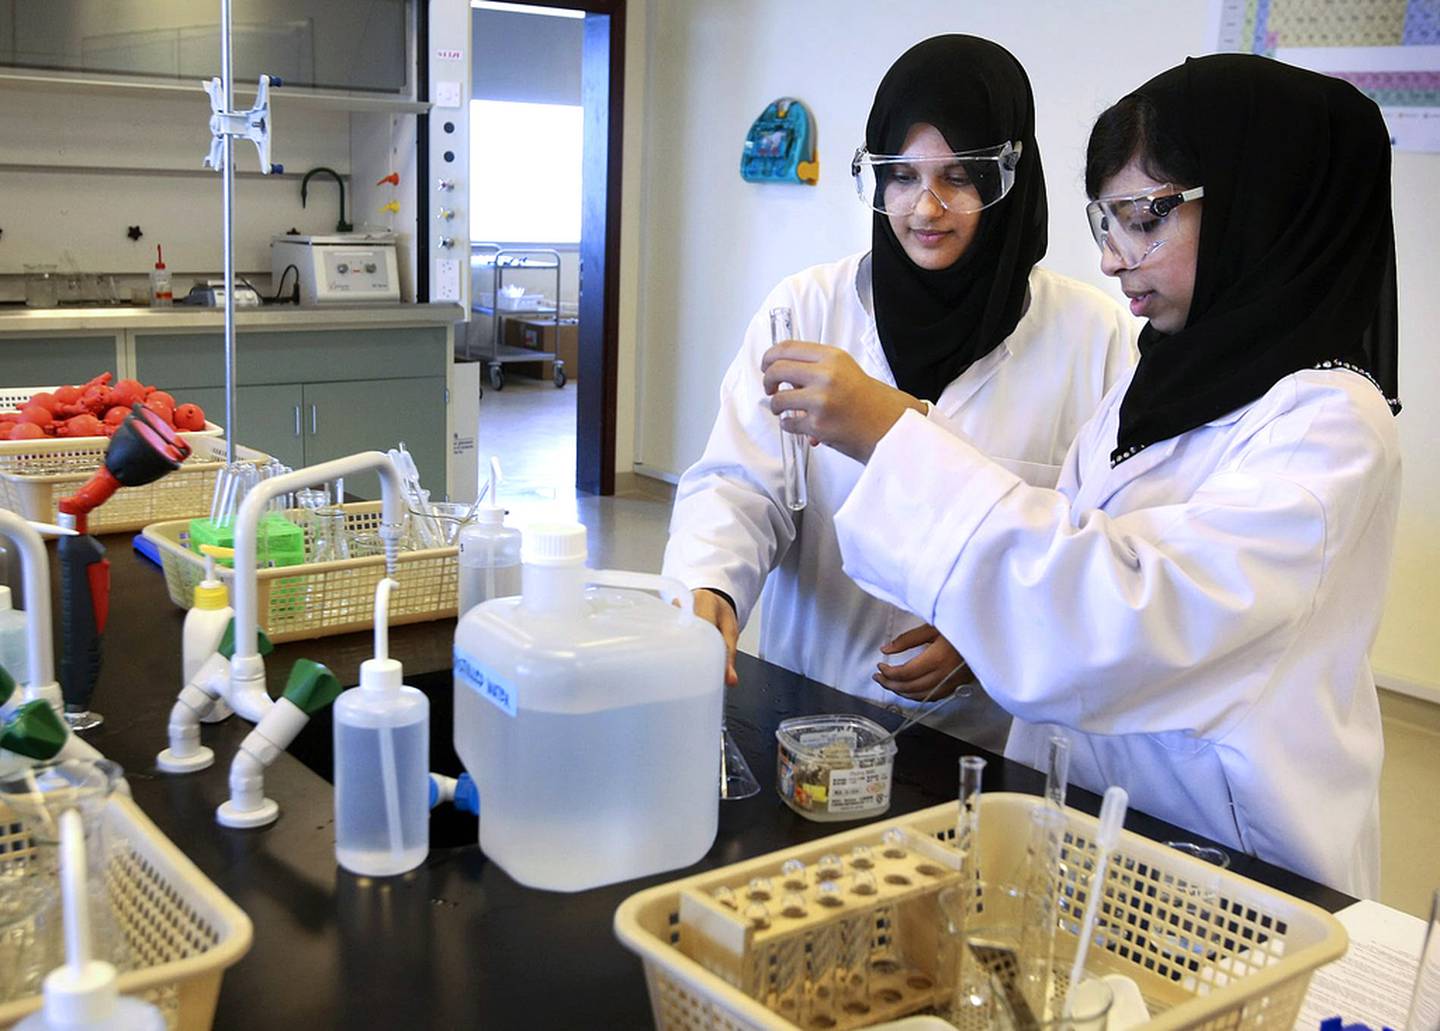 Abu Dhabi’s dedicated women’s college for petroleum engineering at the Petroleum Institute and its MIT-affiliated clean technology university, the Masdar Institute. Delores Johnson / The National